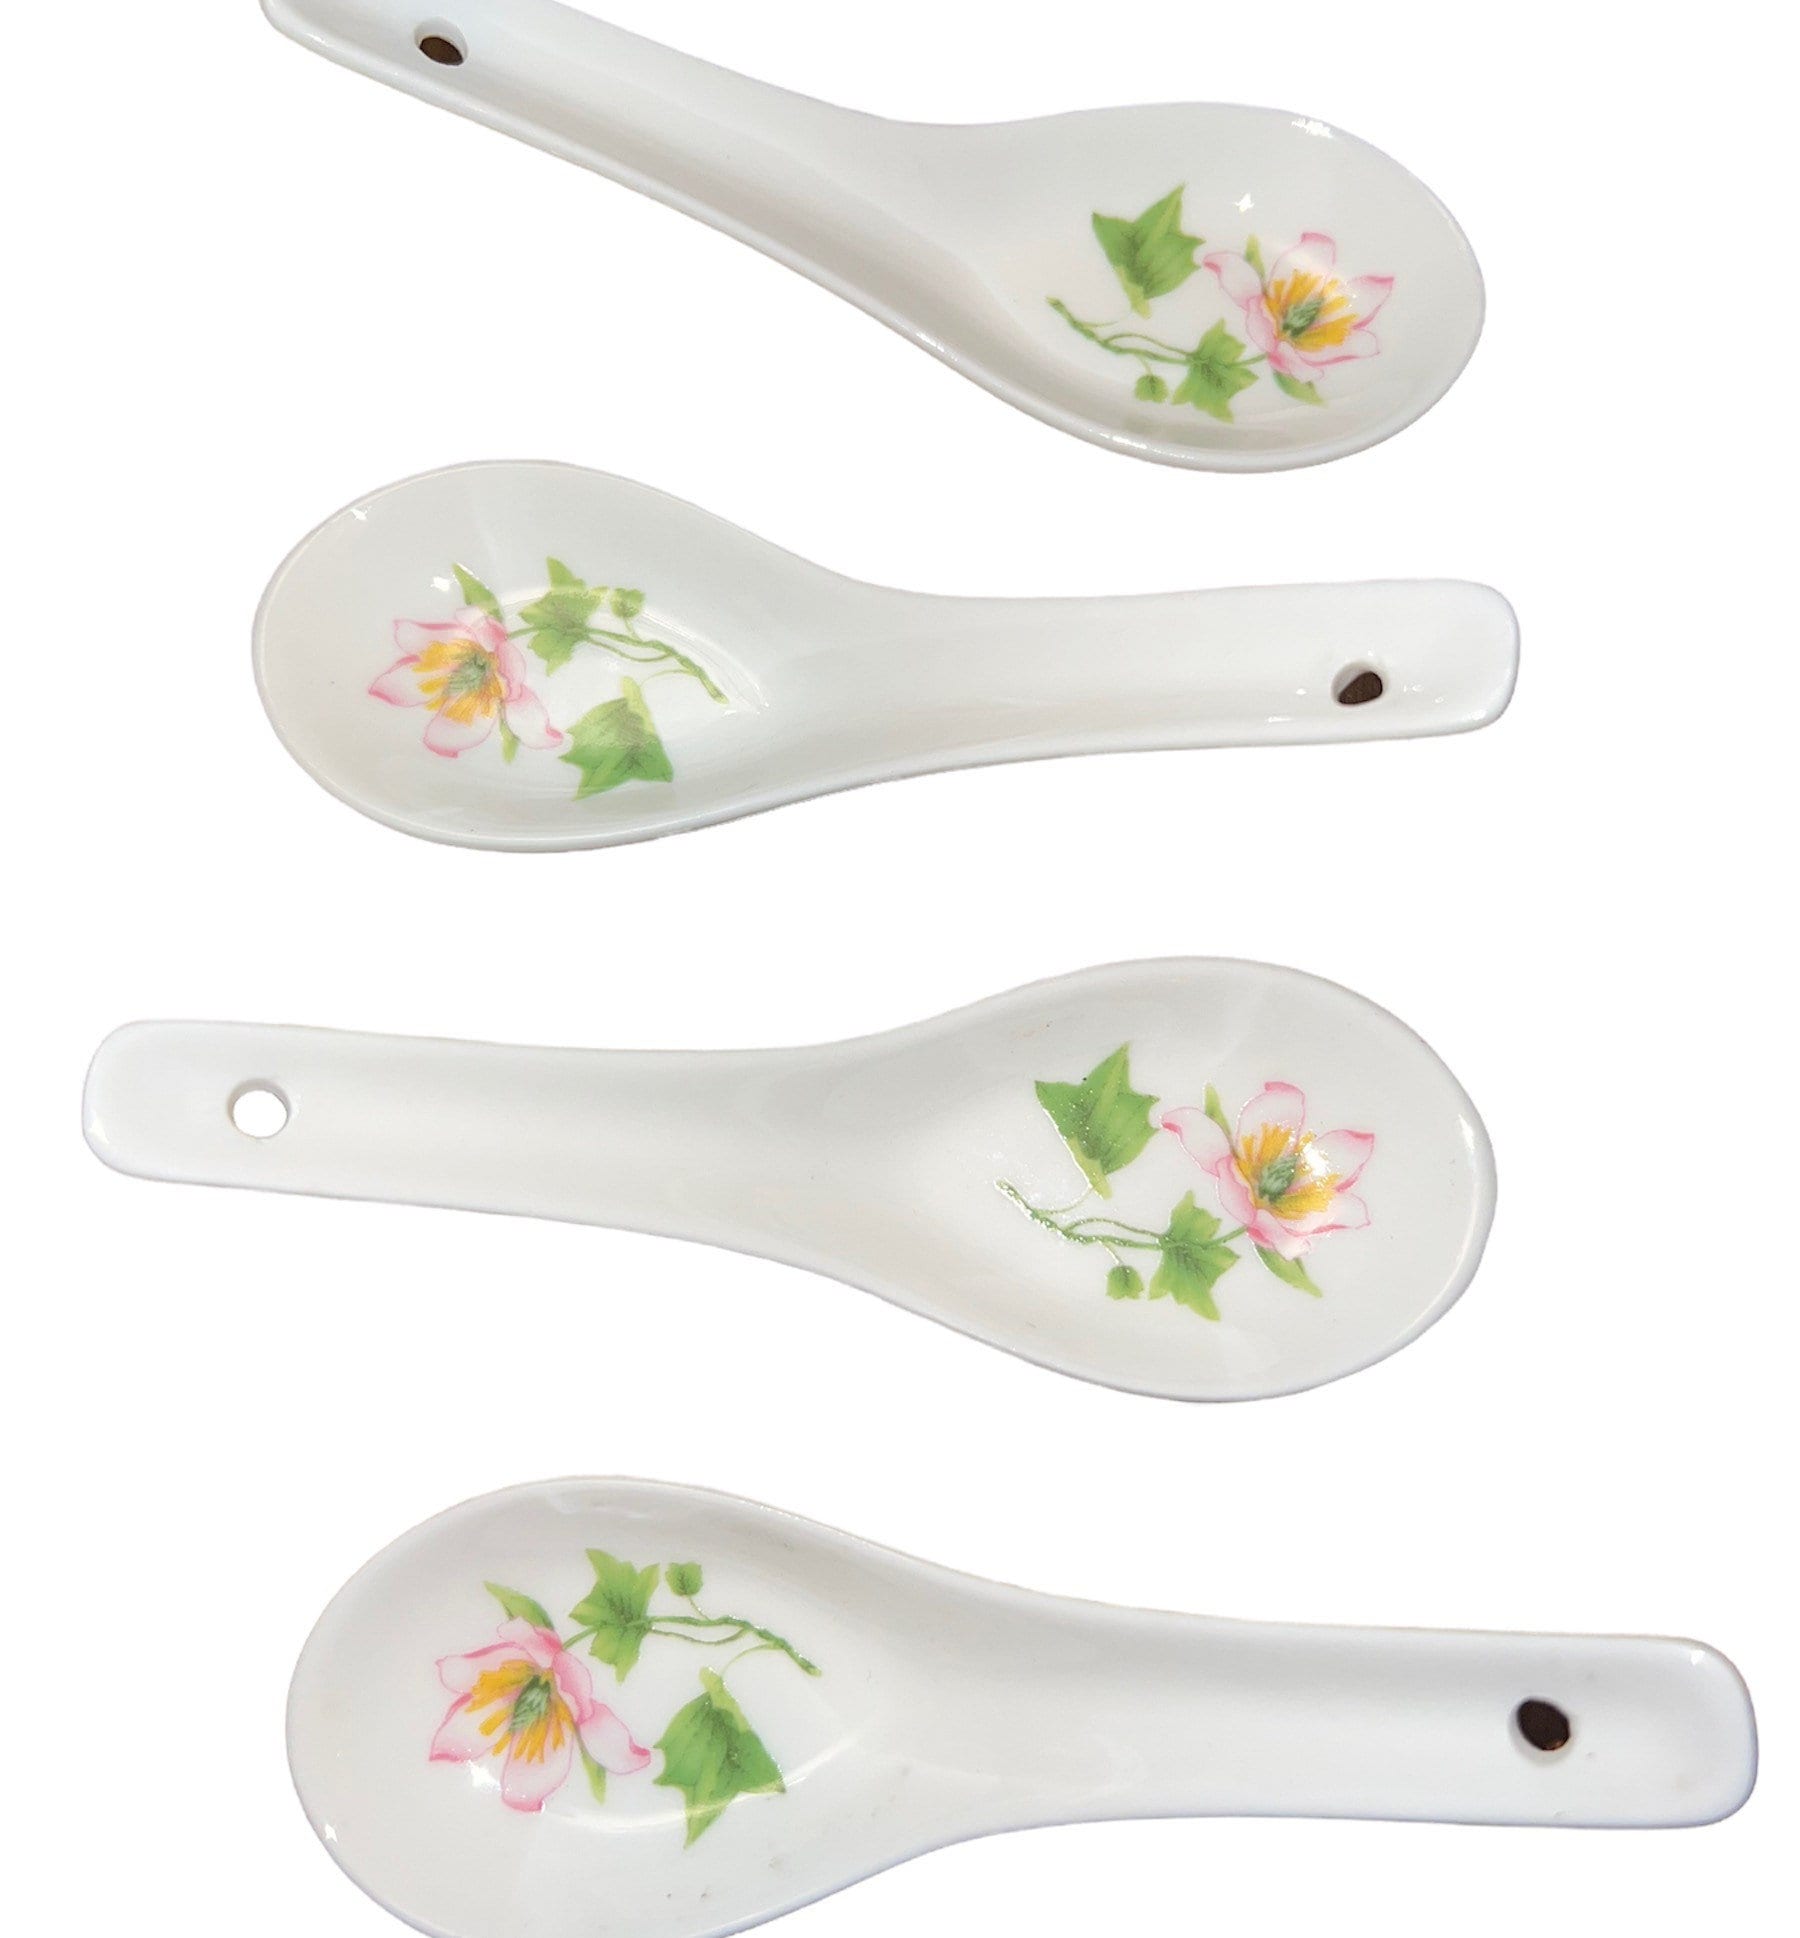 in The Year of The Pig Asian/Chinese Ceramic Soup Spoons Set of Four 